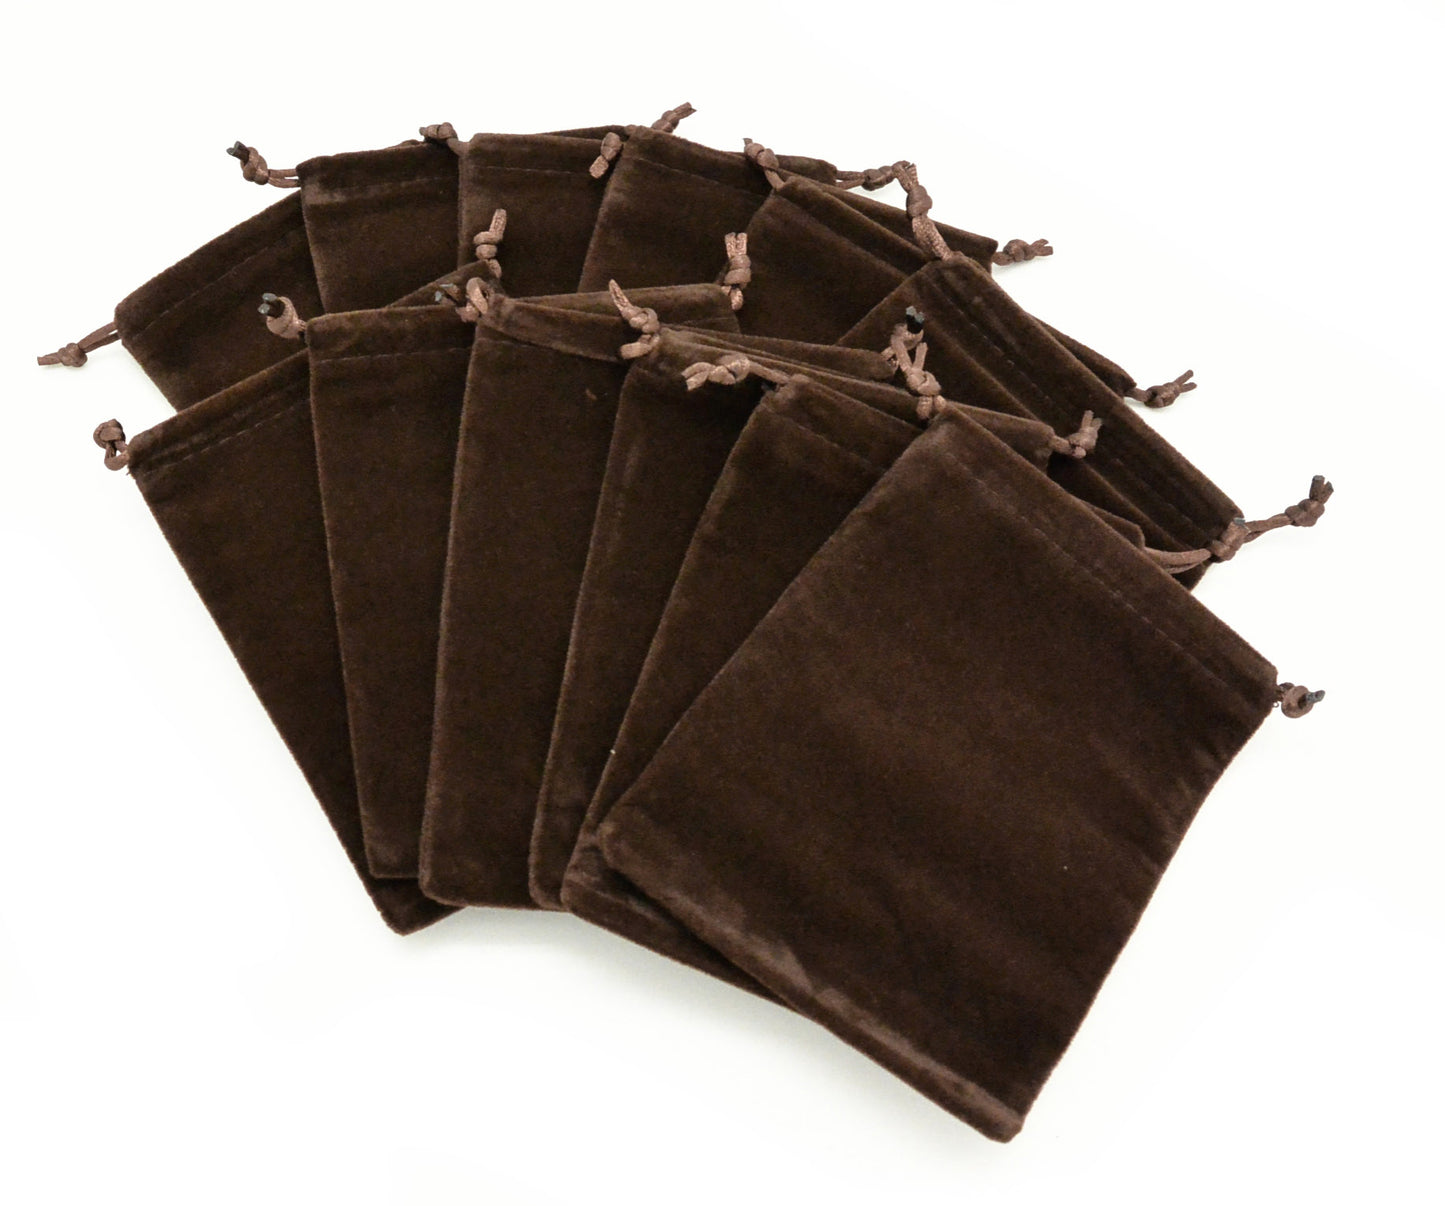 X-Large Brown High Quality Velvet Pouch Bags Party Favors